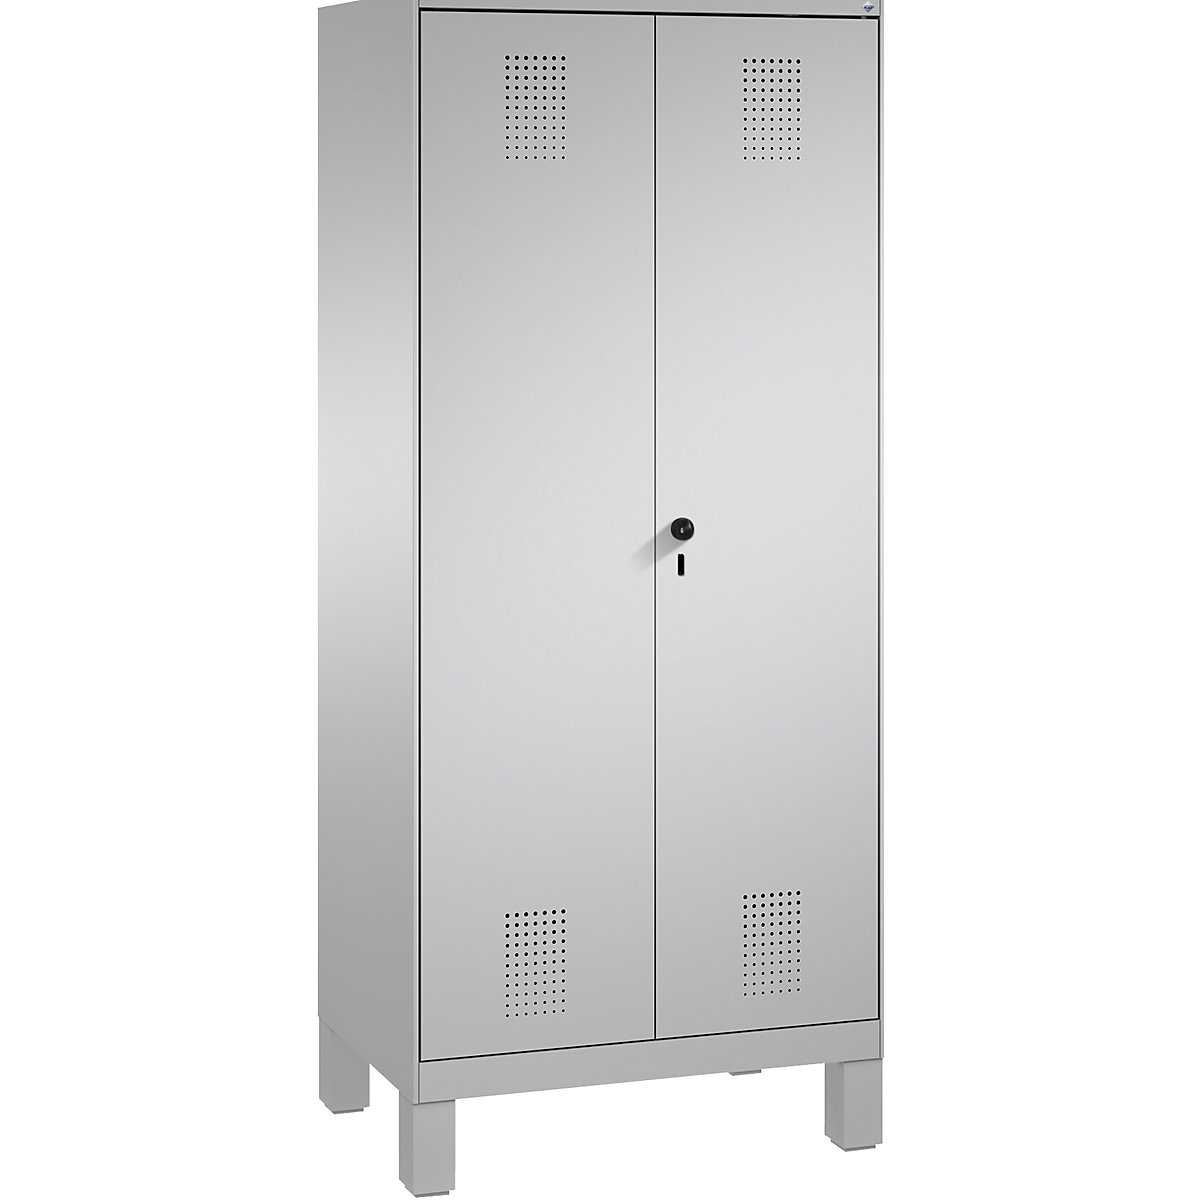 EVOLO storage cupboard, doors close in the middle, with feet – C+P, 2 compartments, 8 shelves, compartment width 400 mm, white aluminium / white aluminium-5